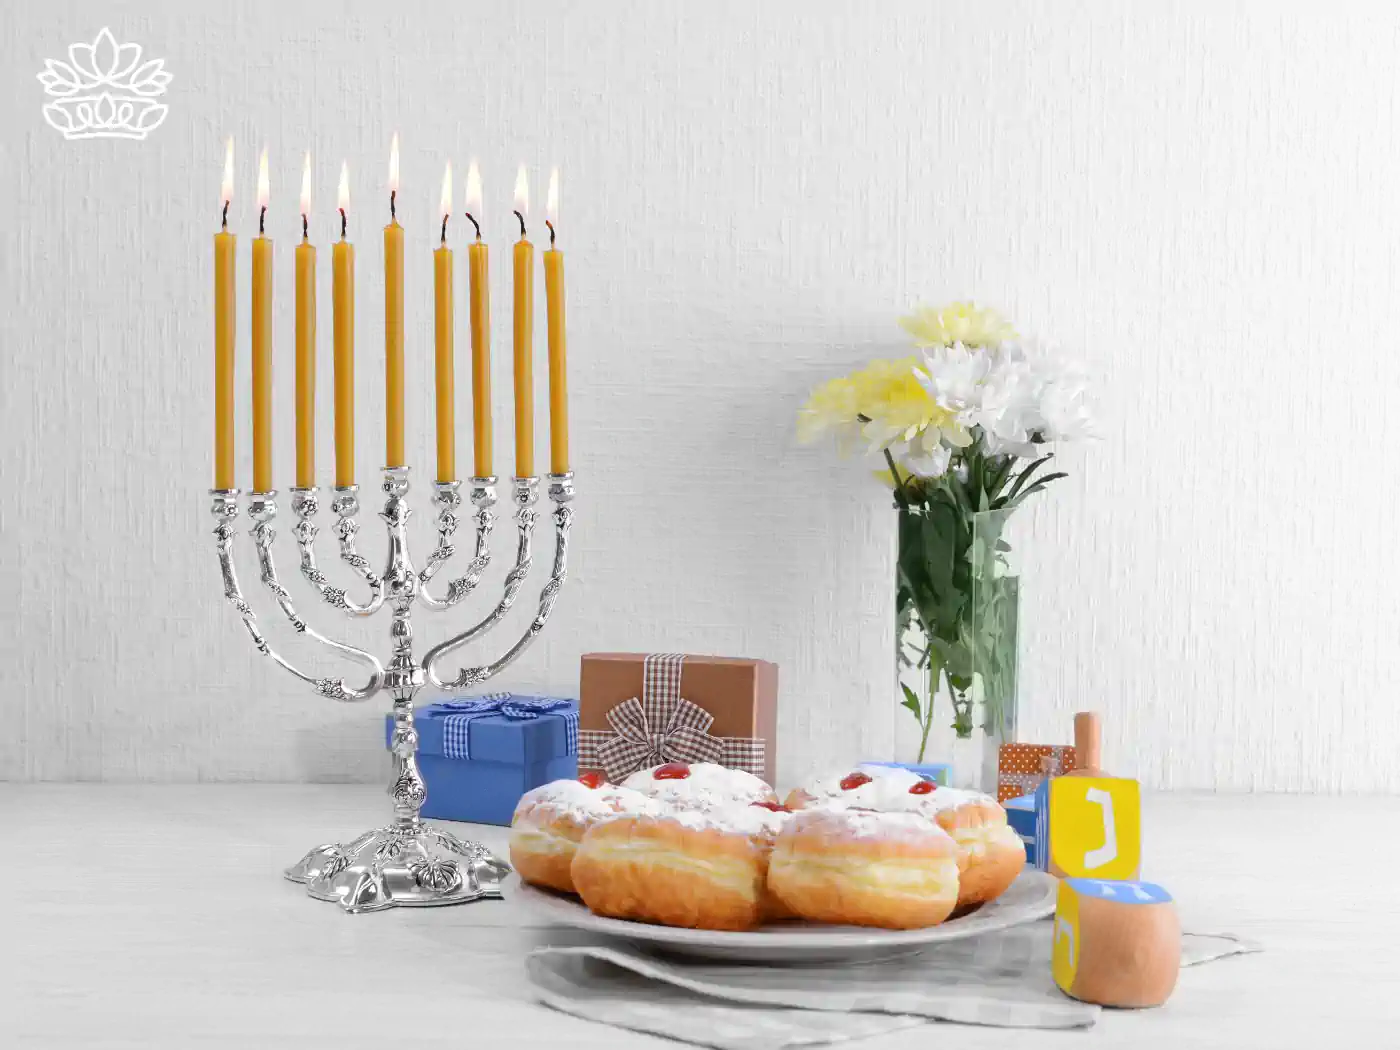 A lit menorah with nine yellow candles, placed on a table alongside wrapped gifts, traditional Hanukkah doughnuts, and a vase with white and yellow flowers. Fabulous Flowers and Gifts - Hanukkah Flowers.